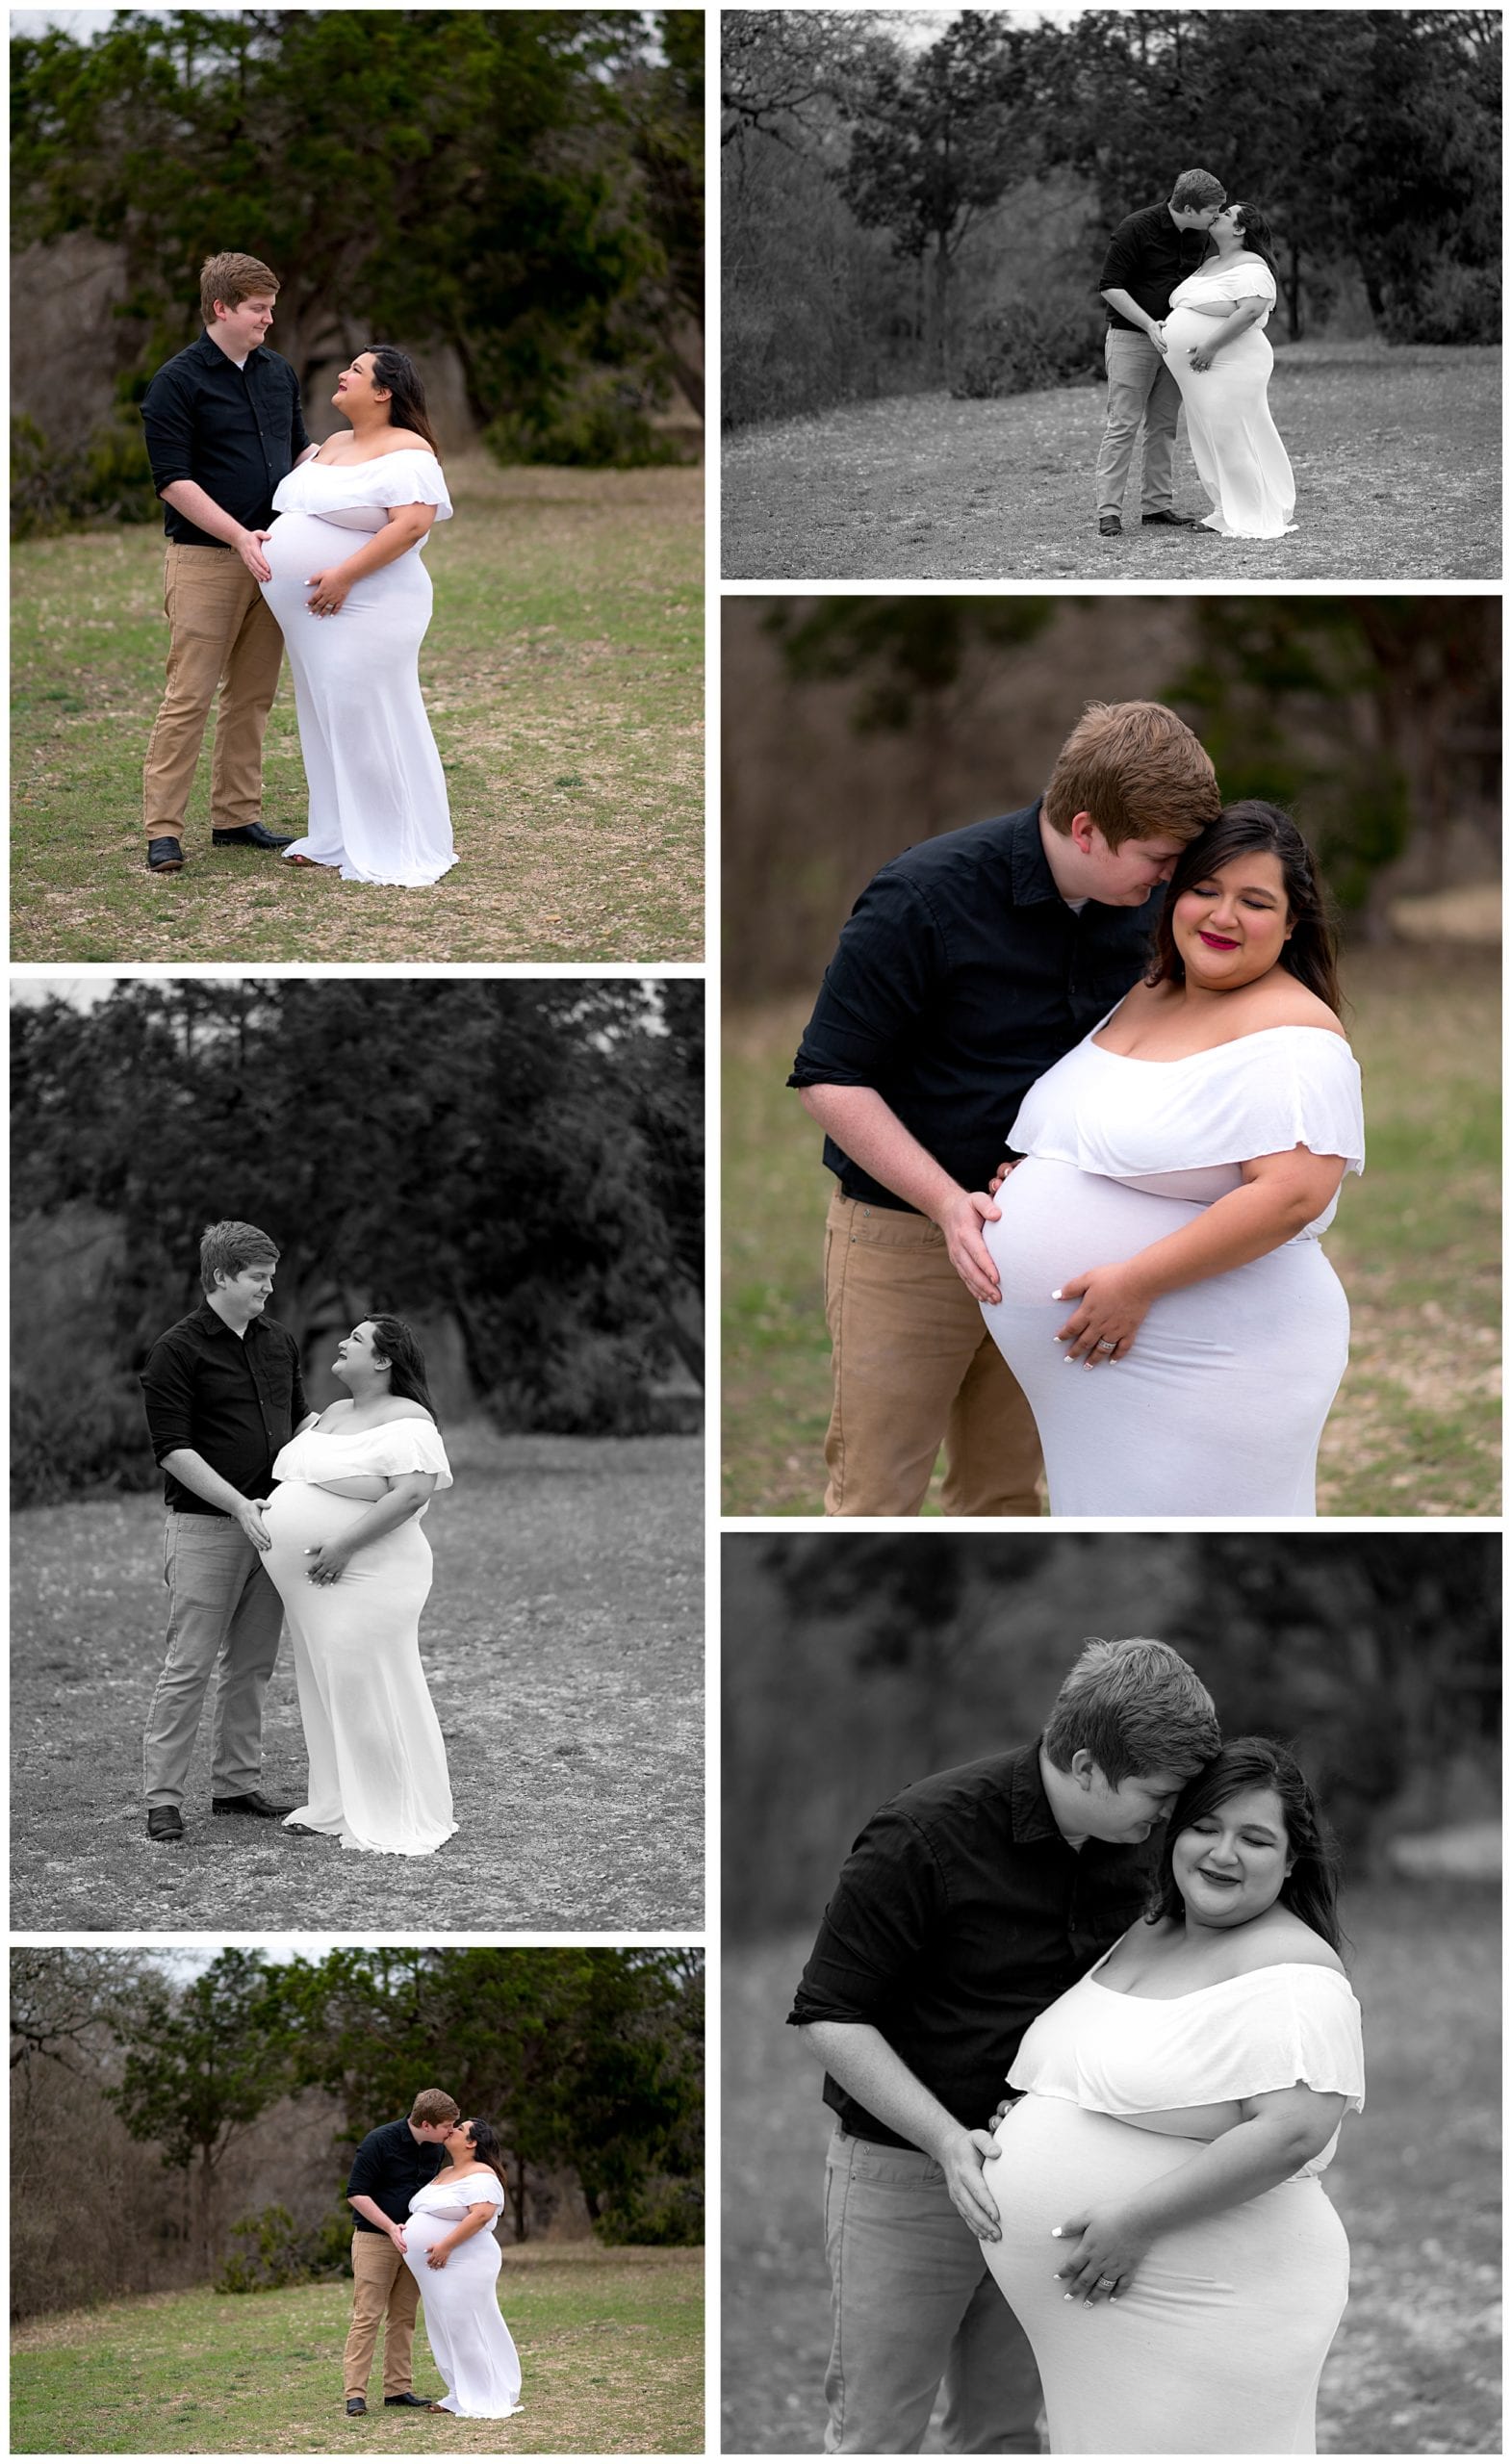 Maternity Photos of a couple and the woman is in a white maternity dress